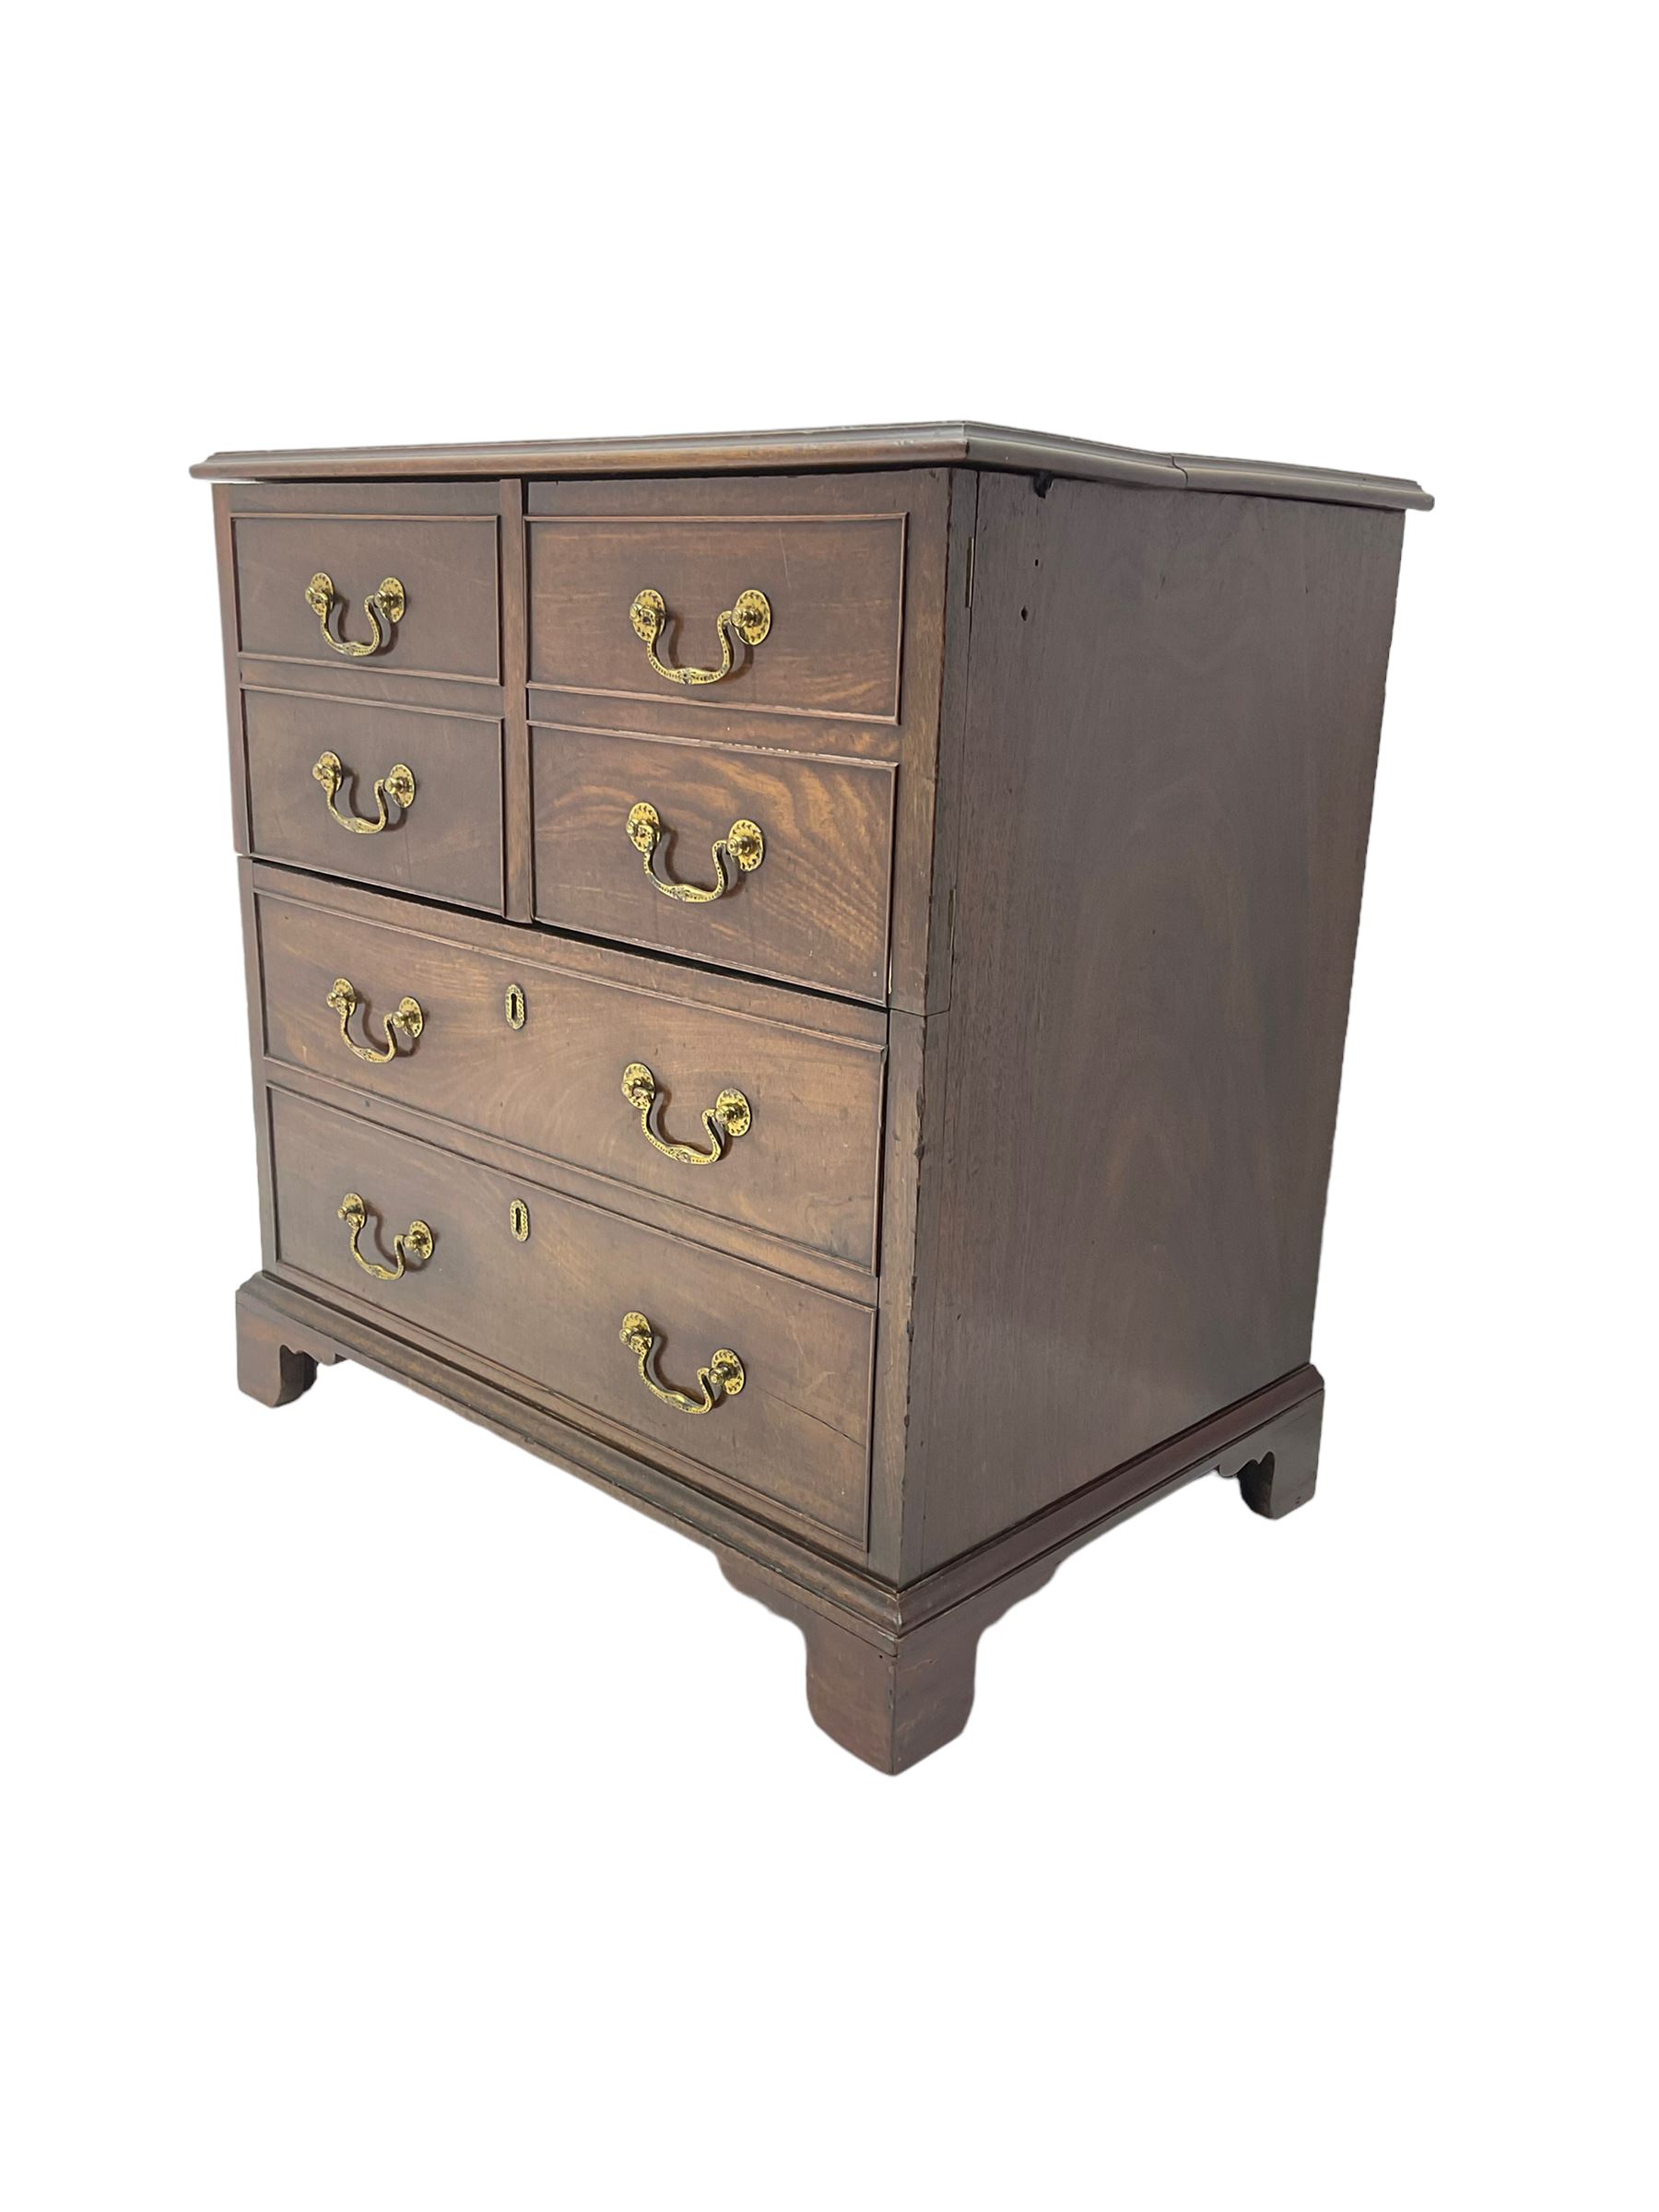 George III mahogany commode chest - Image 4 of 7